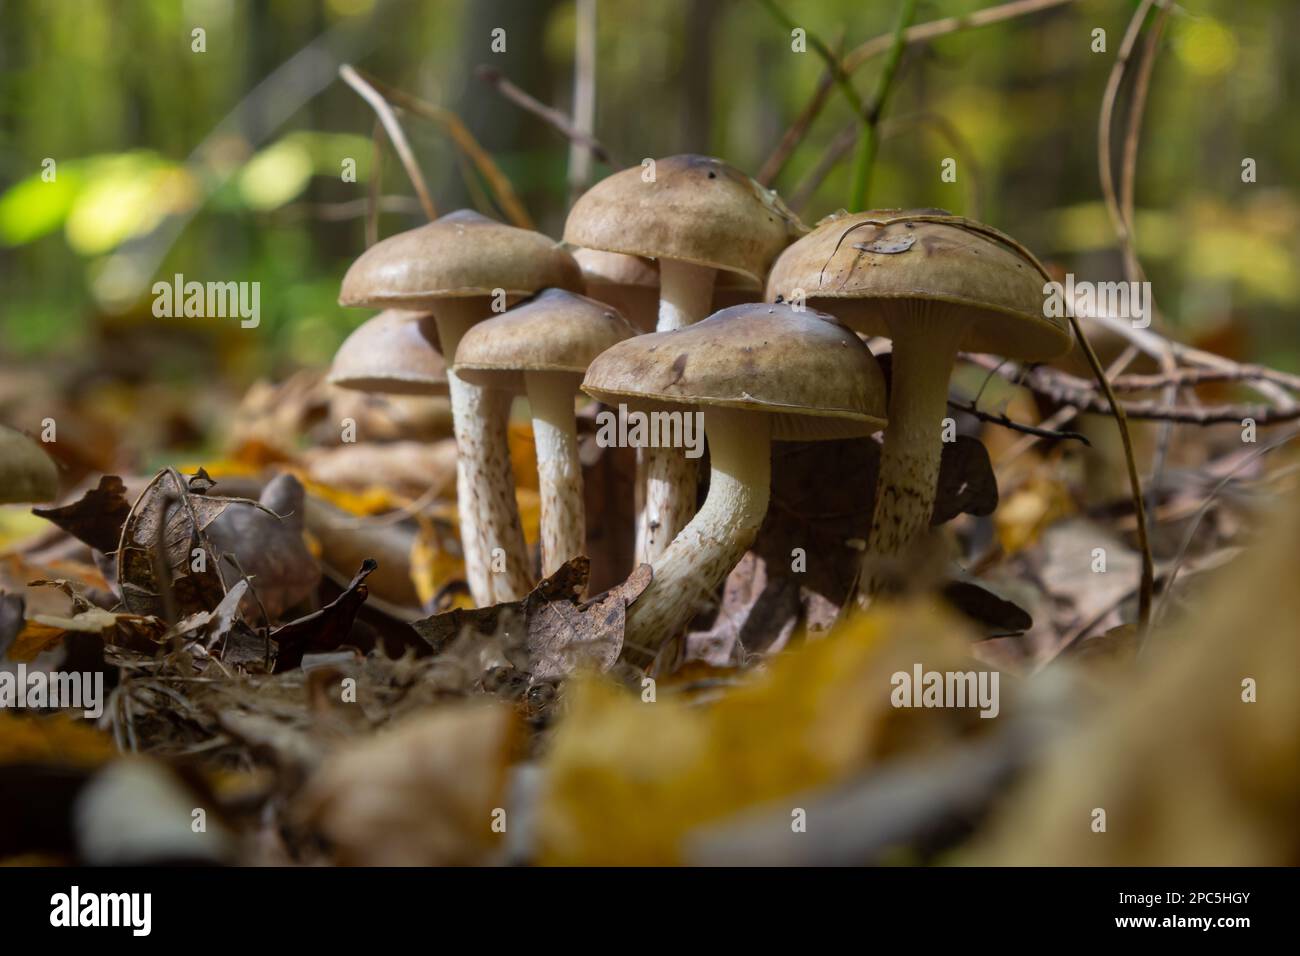 Small Gassy webcap, Cortinarius traganus, poisonous mushrooms in forest close-up, selective focus, shallow DOF. Stock Photo